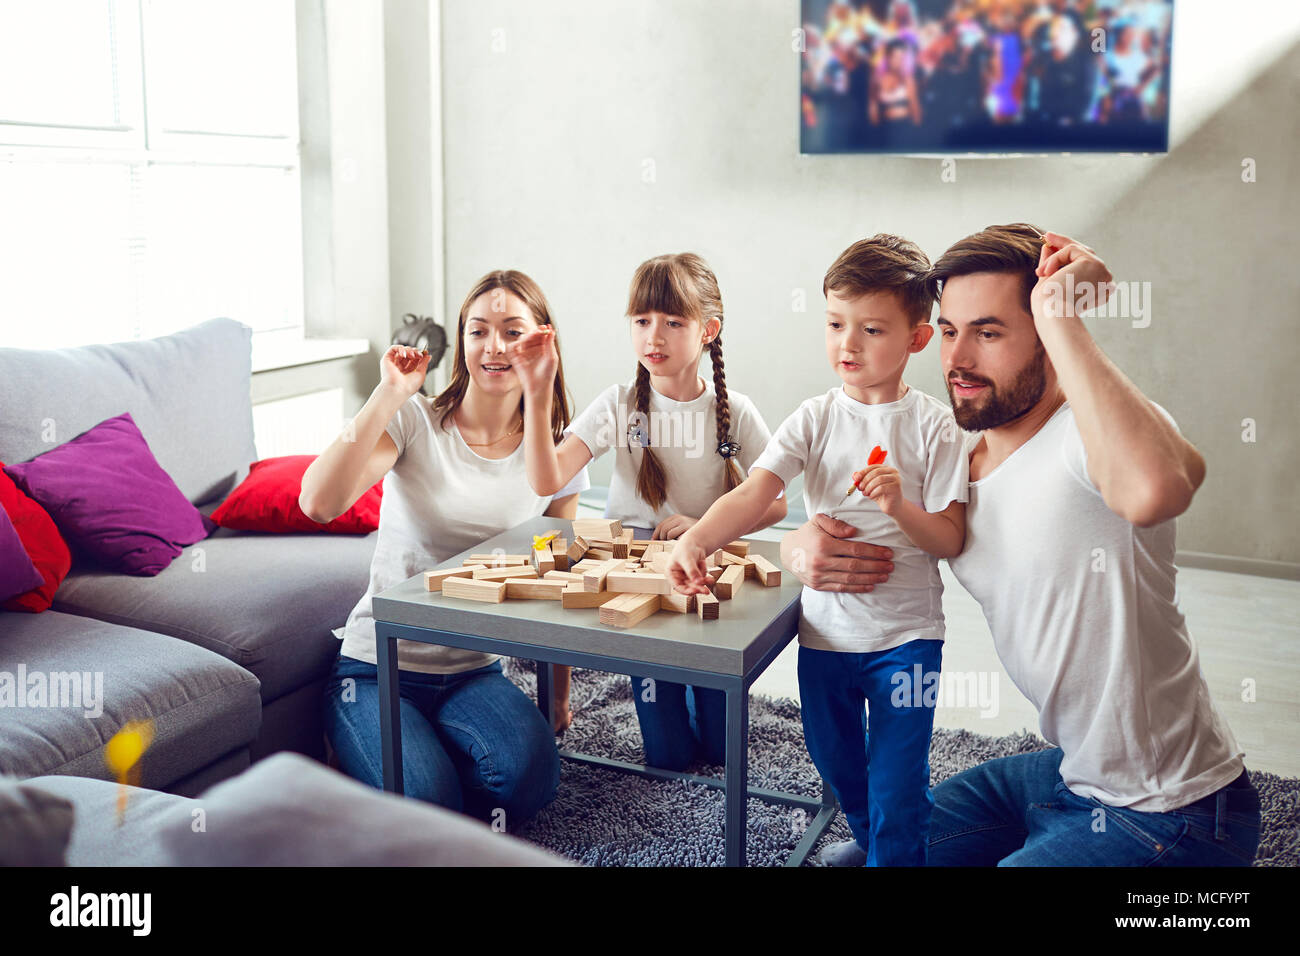 Happy family playing board games at home. Mother, father and children play together. Stock Photo